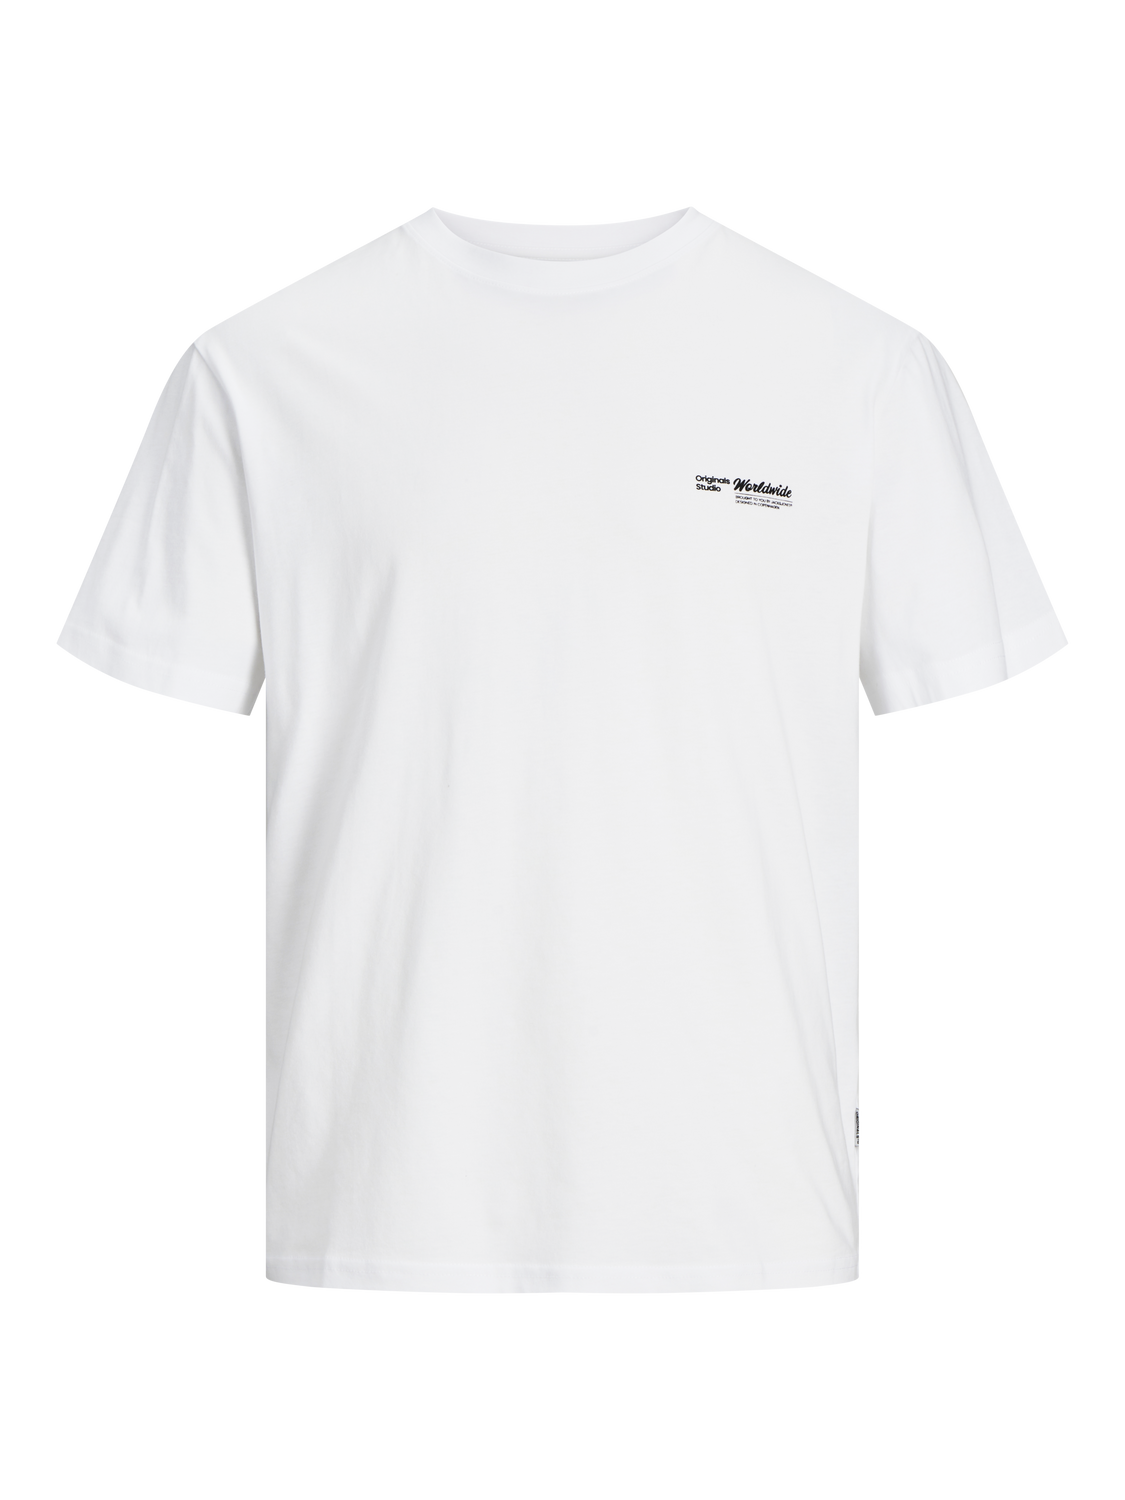 Jack & Jones Relaxed Fit Crew neck T-Shirt -Bright White - 12256712